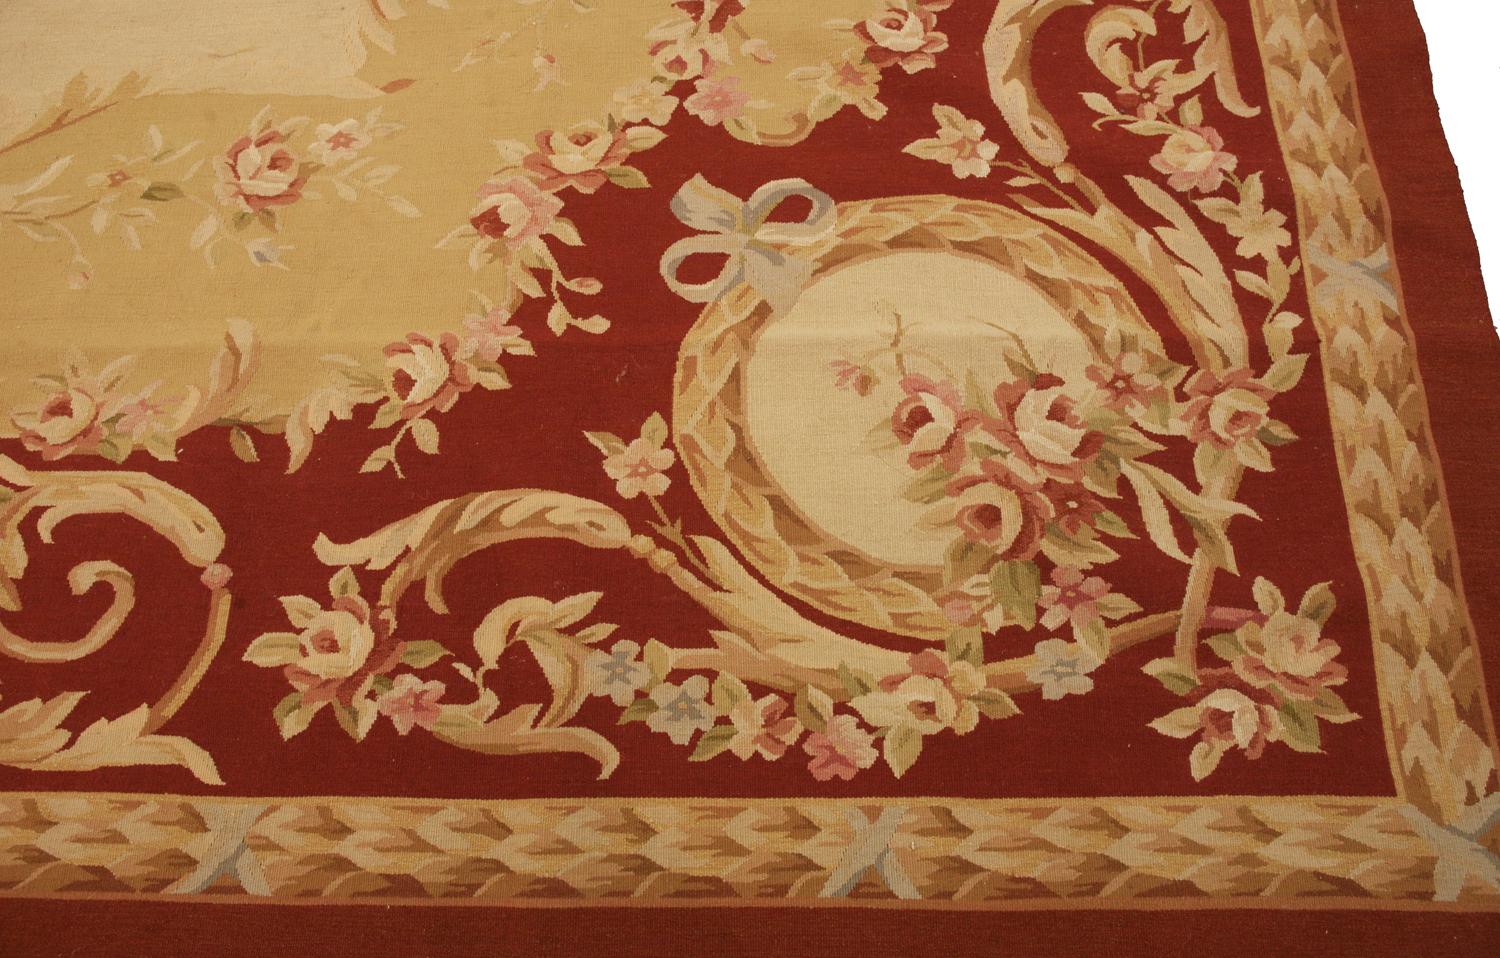 Hand-Knotted Chinese Aubusson Flat-Weave Rug with Medallion and Floral Design, 21st Century